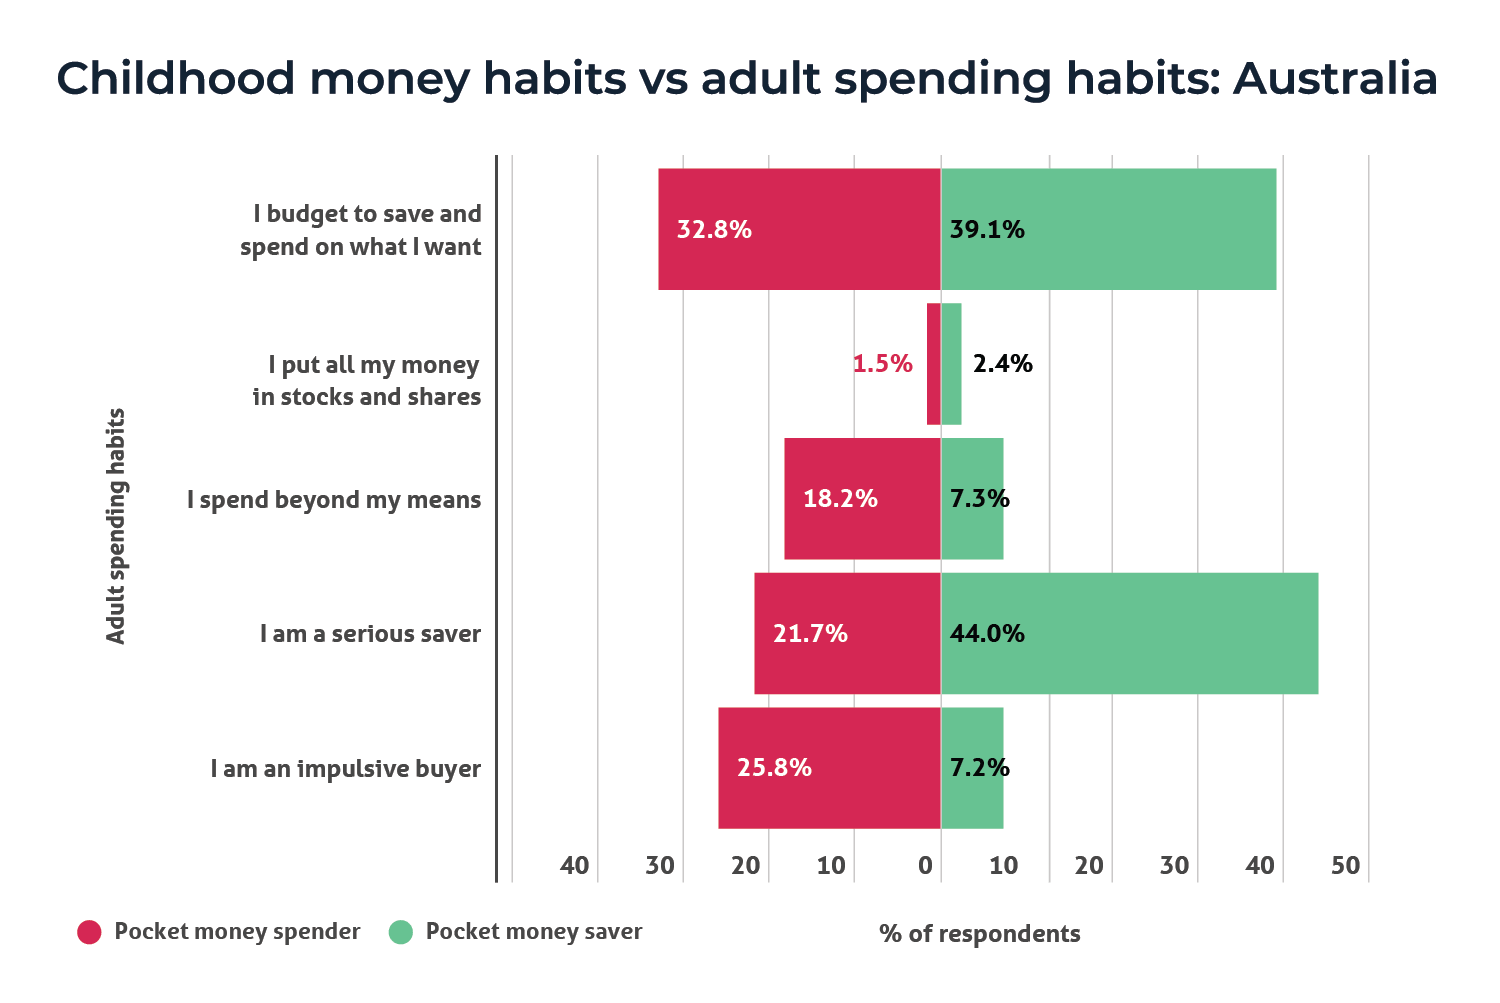 A bar chart showing the difference in Australian spending habits between those who saved pocket money and those who spent it